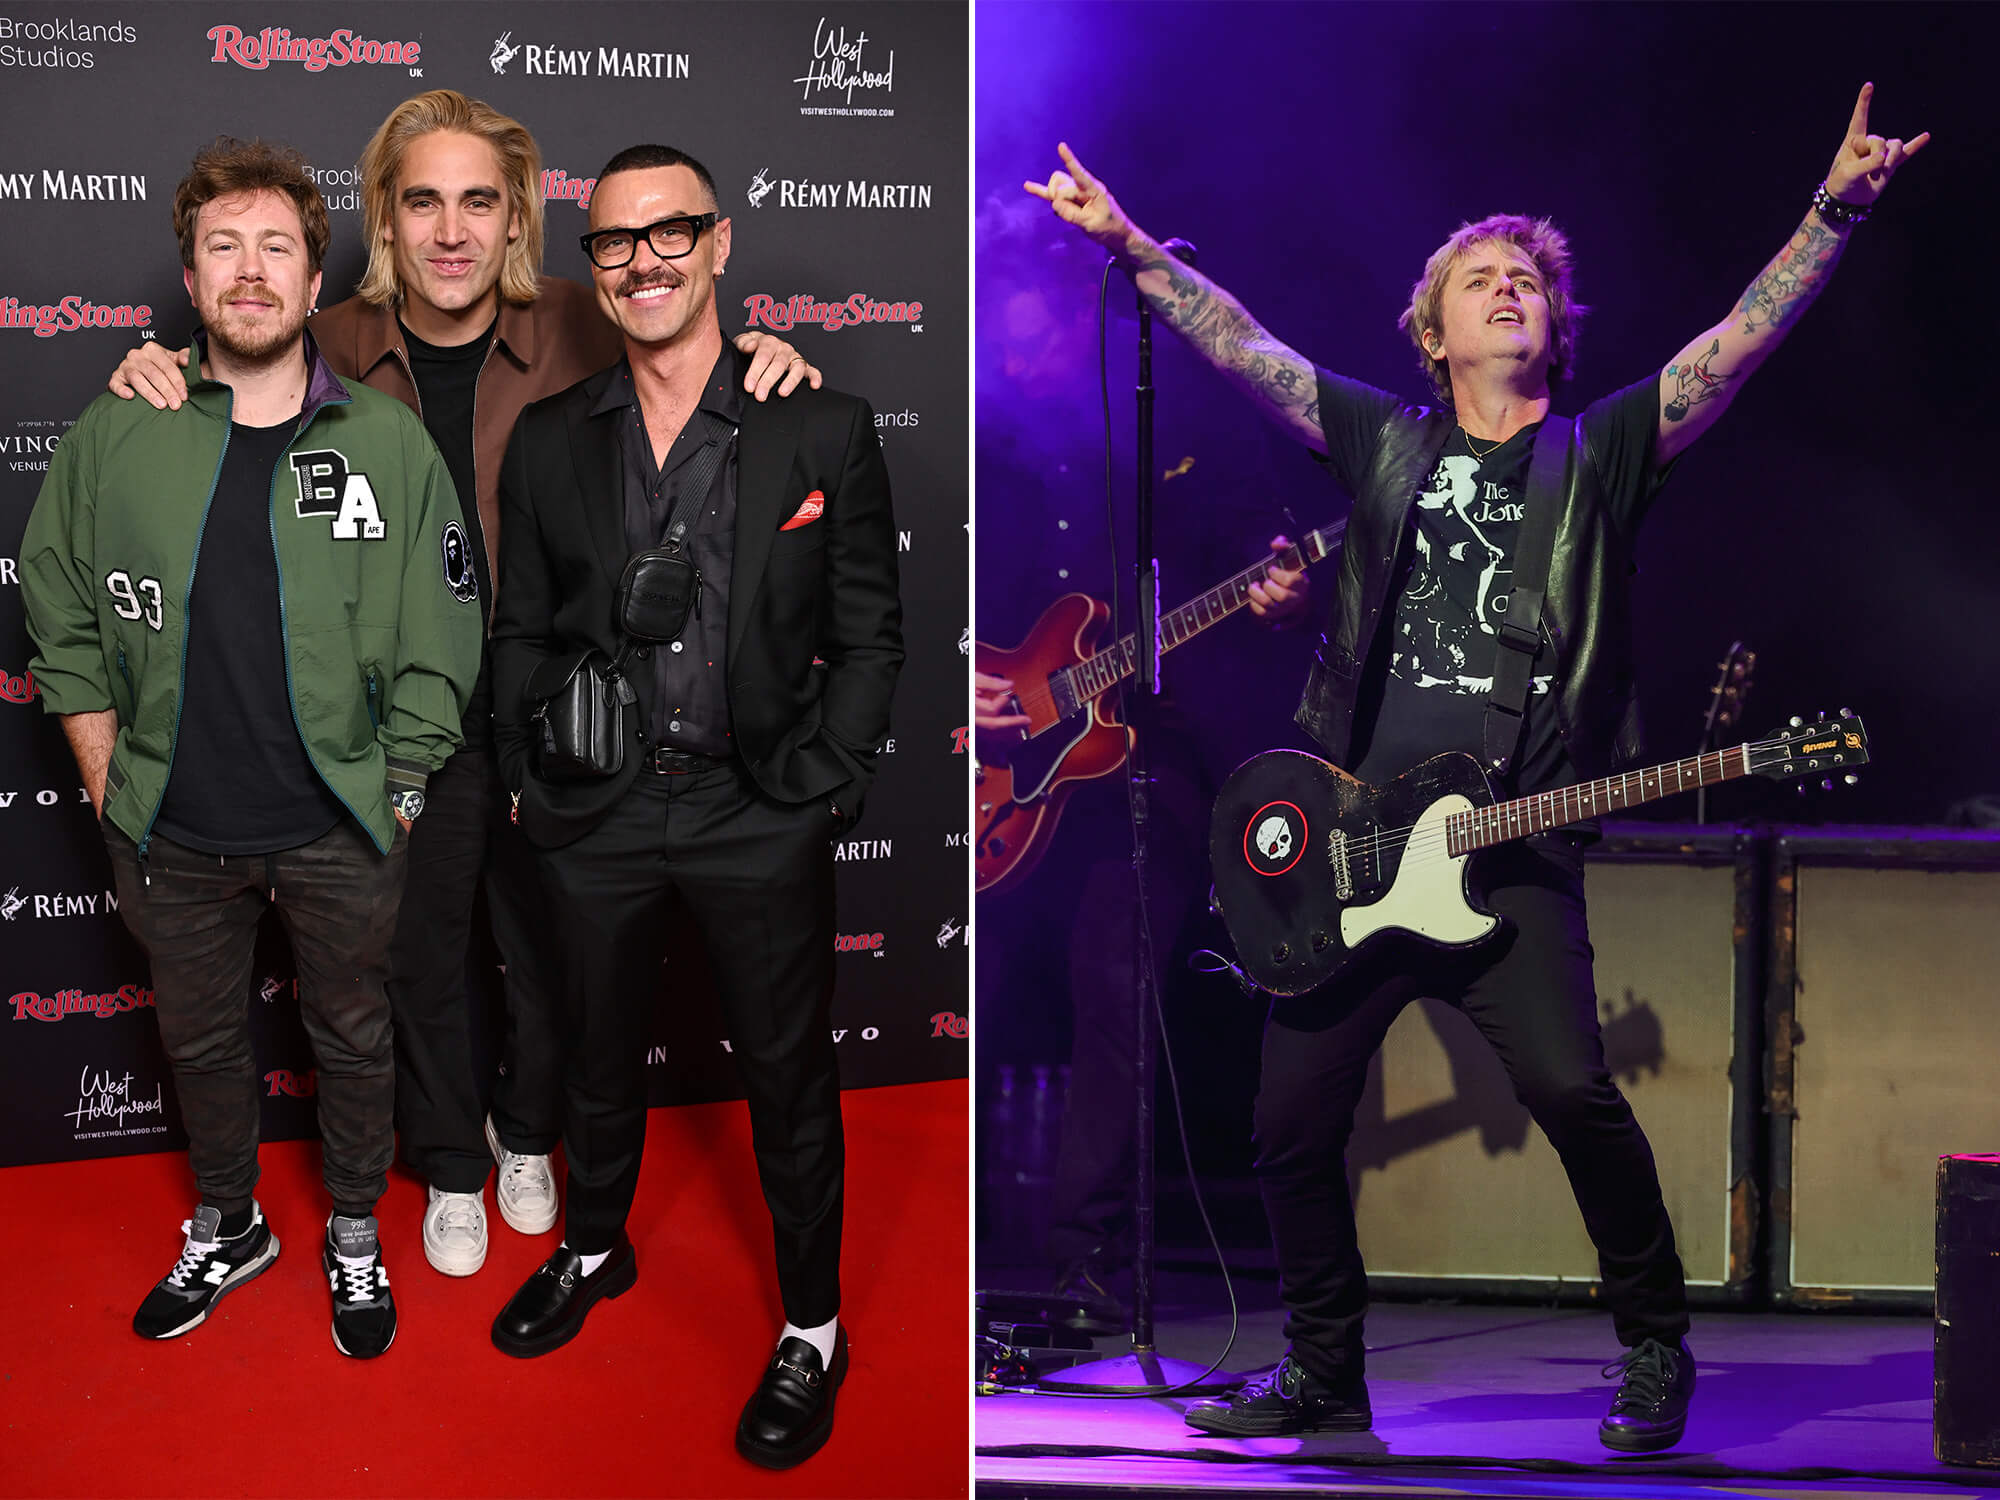 James, Charlie and Matt of Busted standing together smiling on a red carpet (left). Billie Joe Armstrong of Green Day playing guitar on stage. He has both arms up in the air (right).